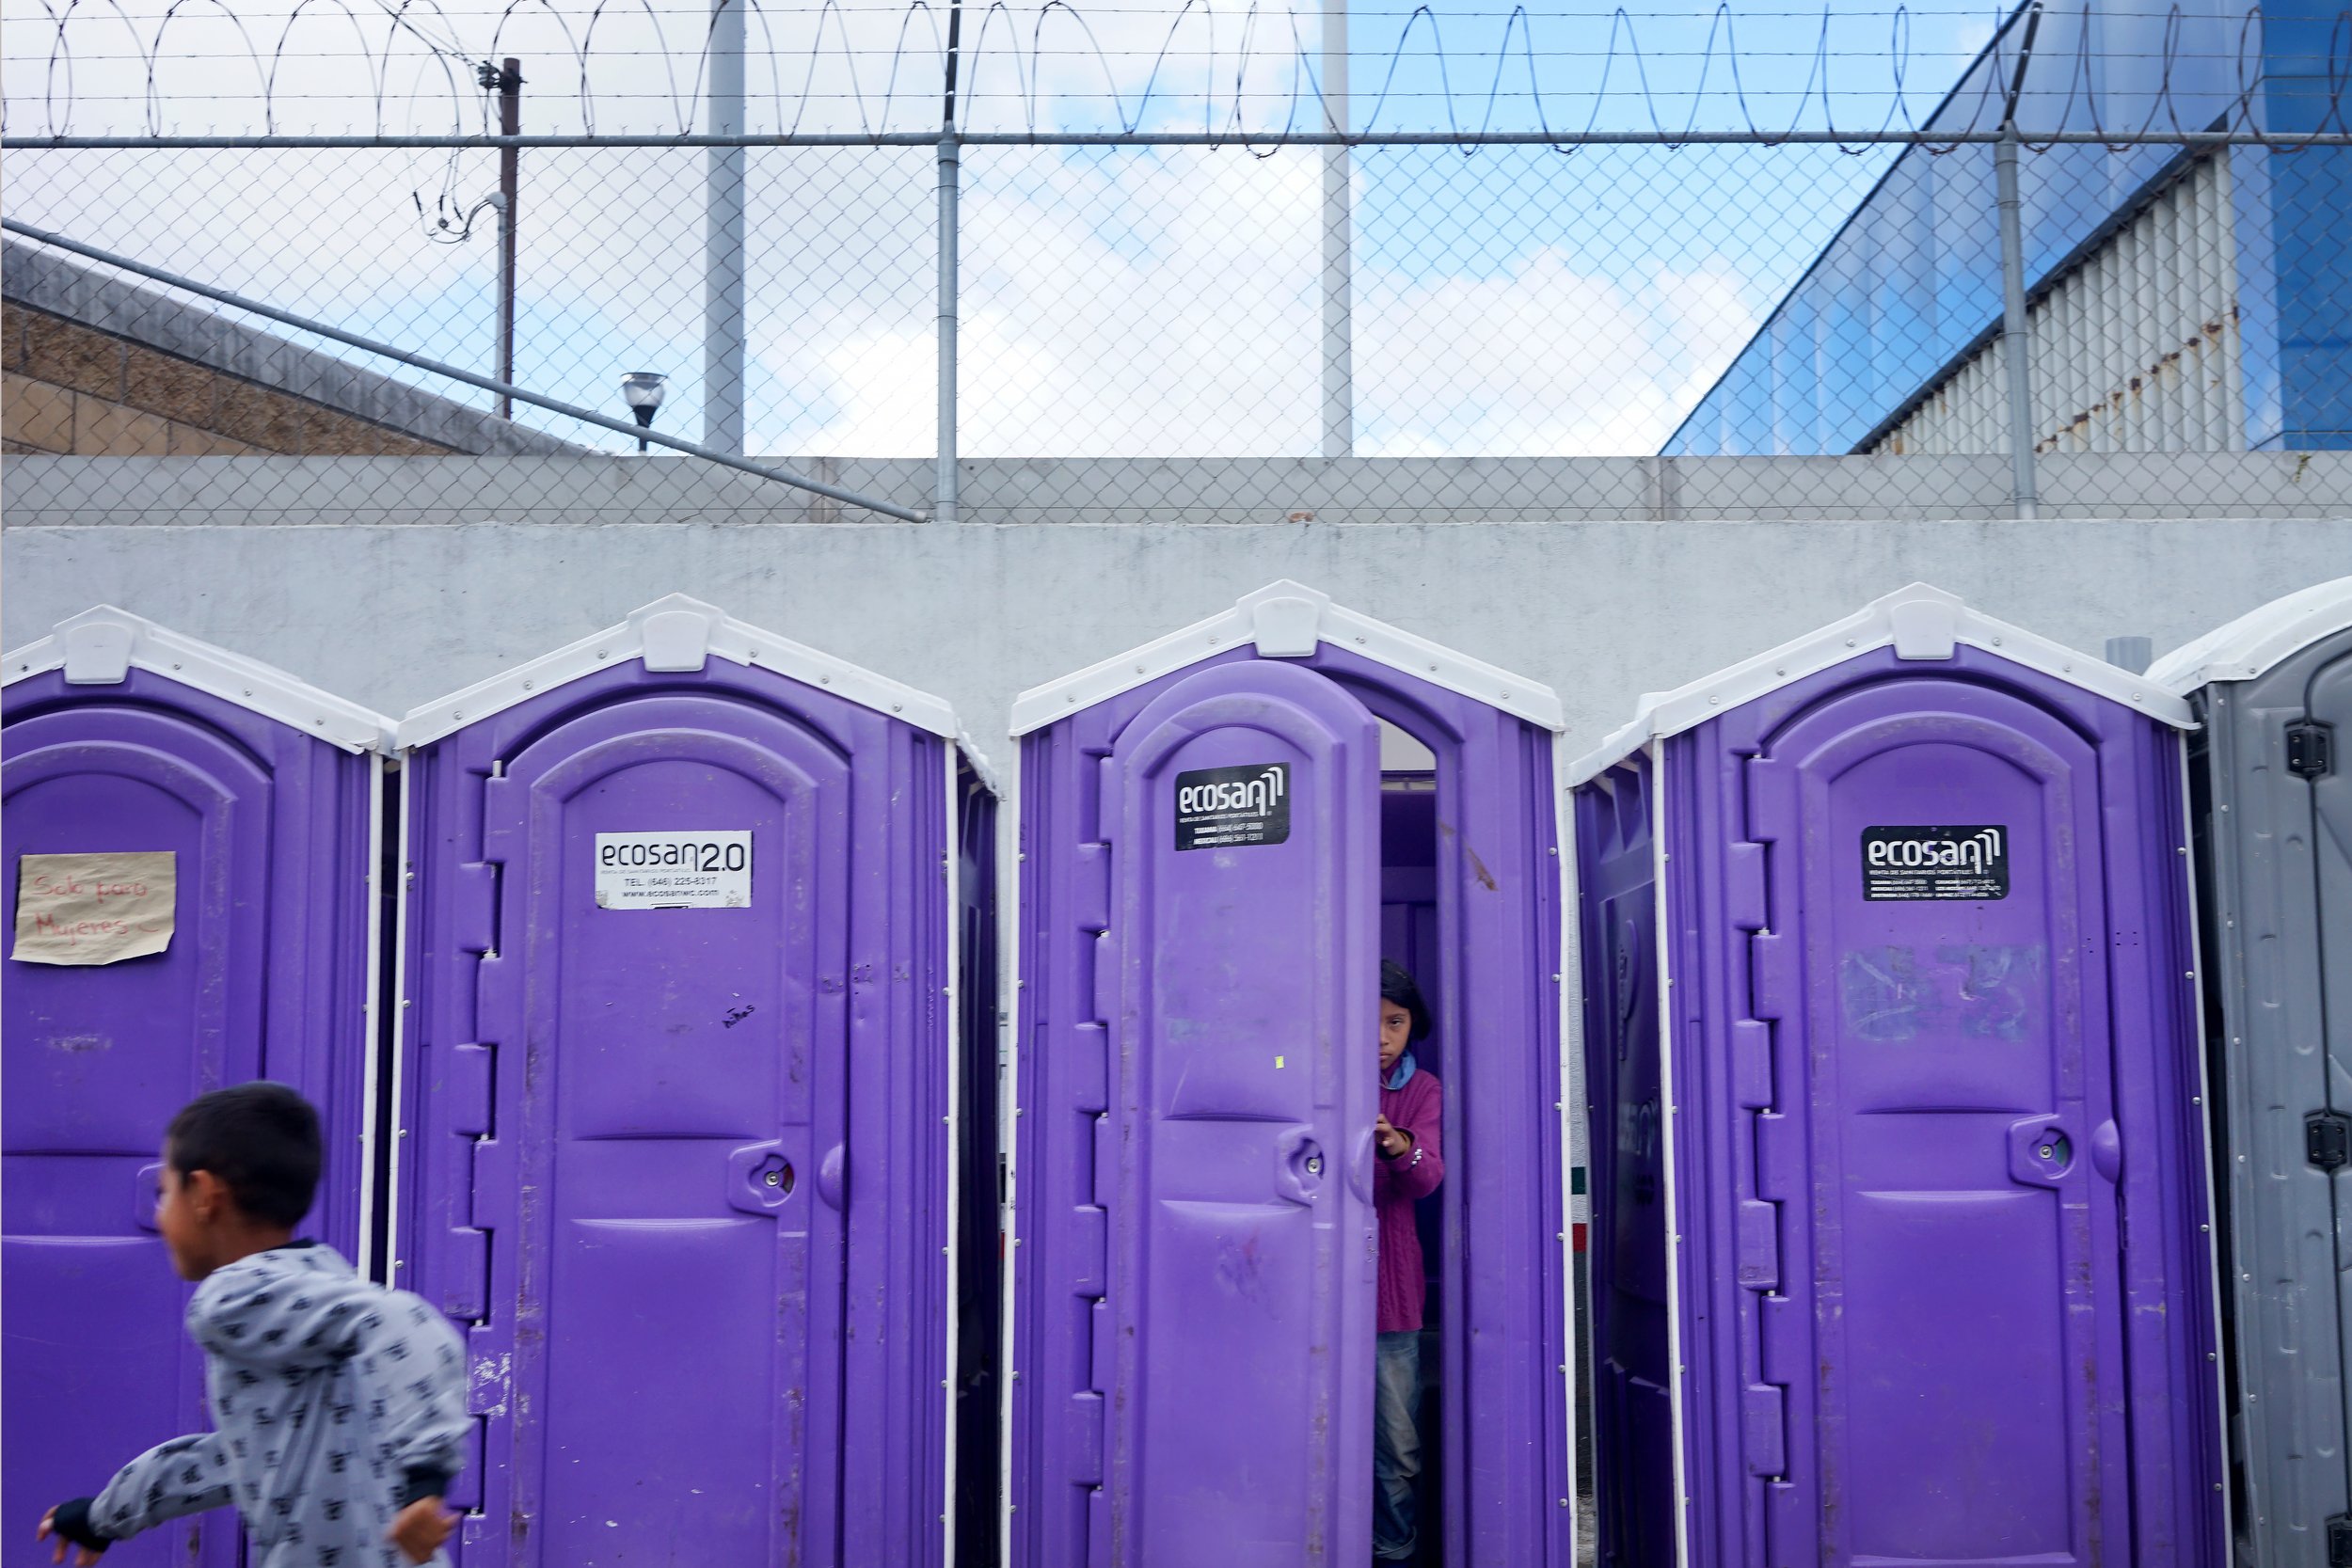  A girl exists one of the donated bathrooms at El Chaparral in Tijuana, Mexico. 